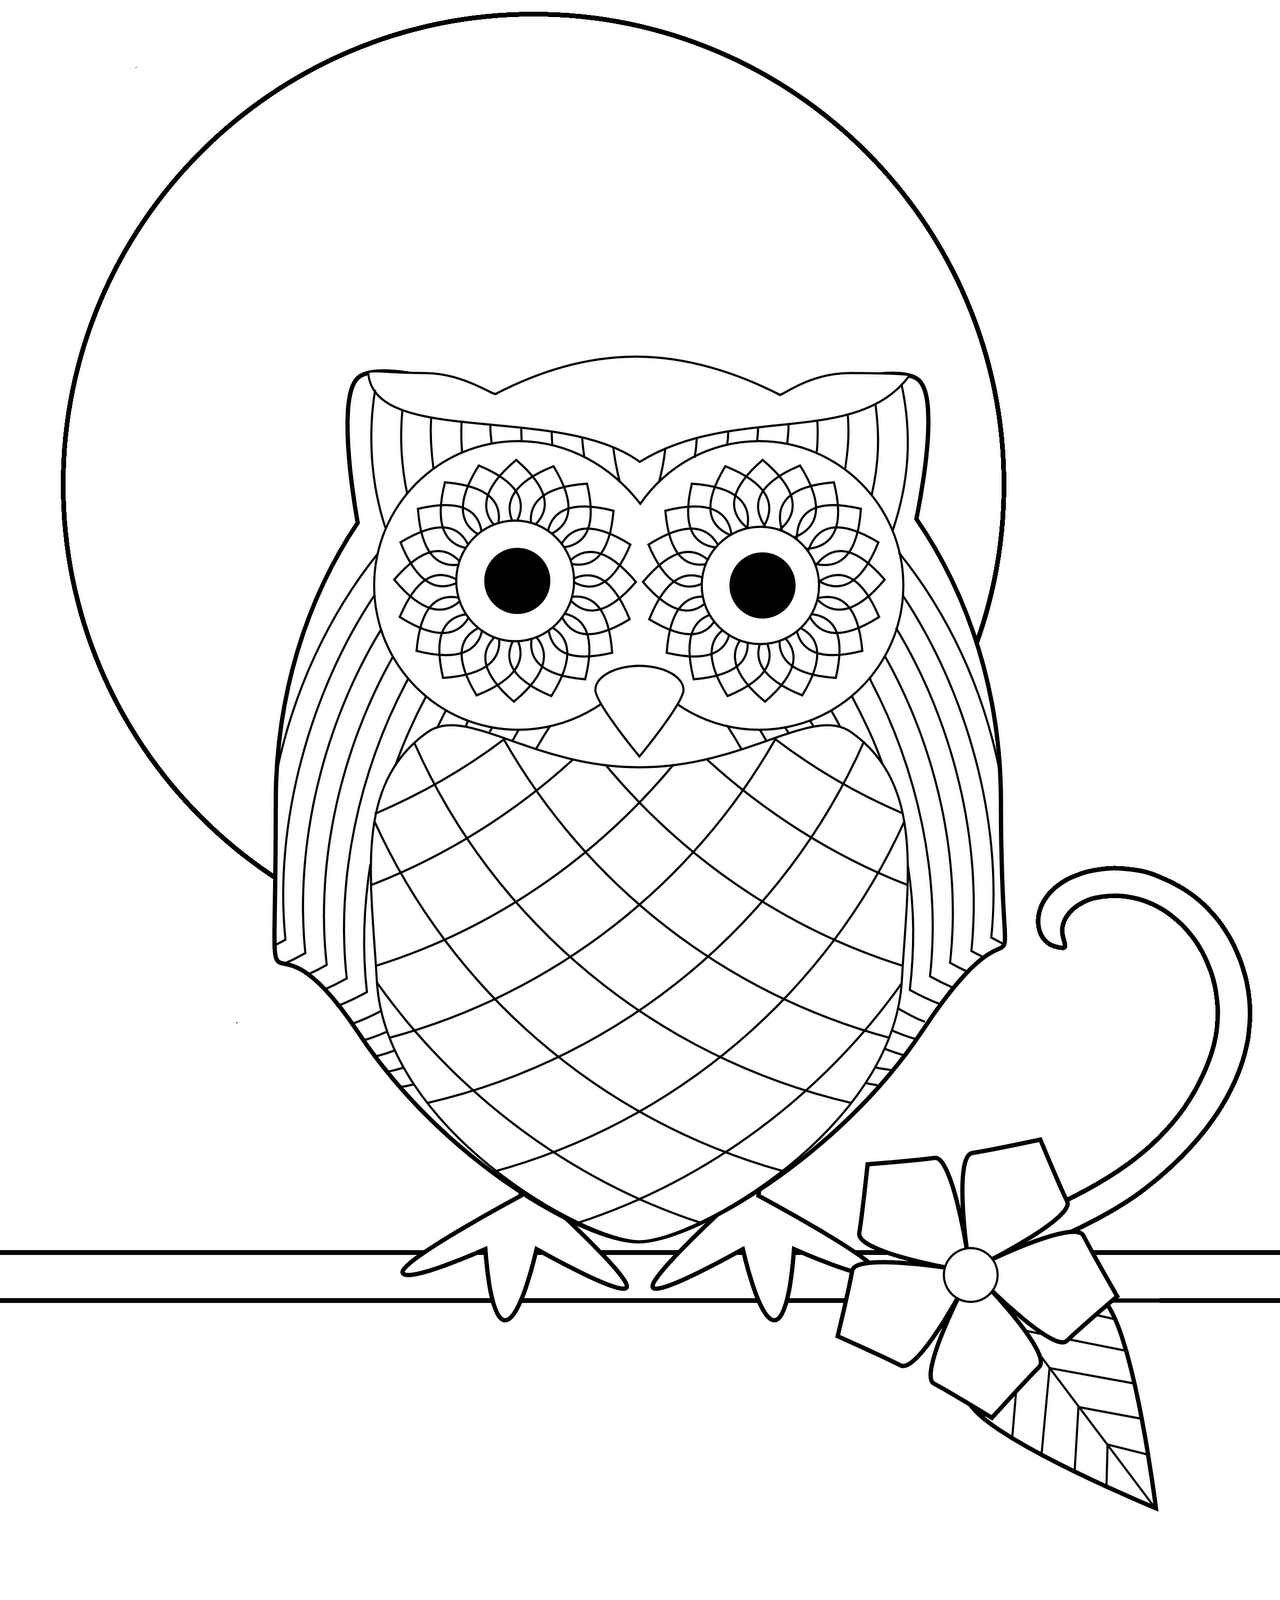 Cute Owl Coloring Pages
 printable coloring pages of an owl